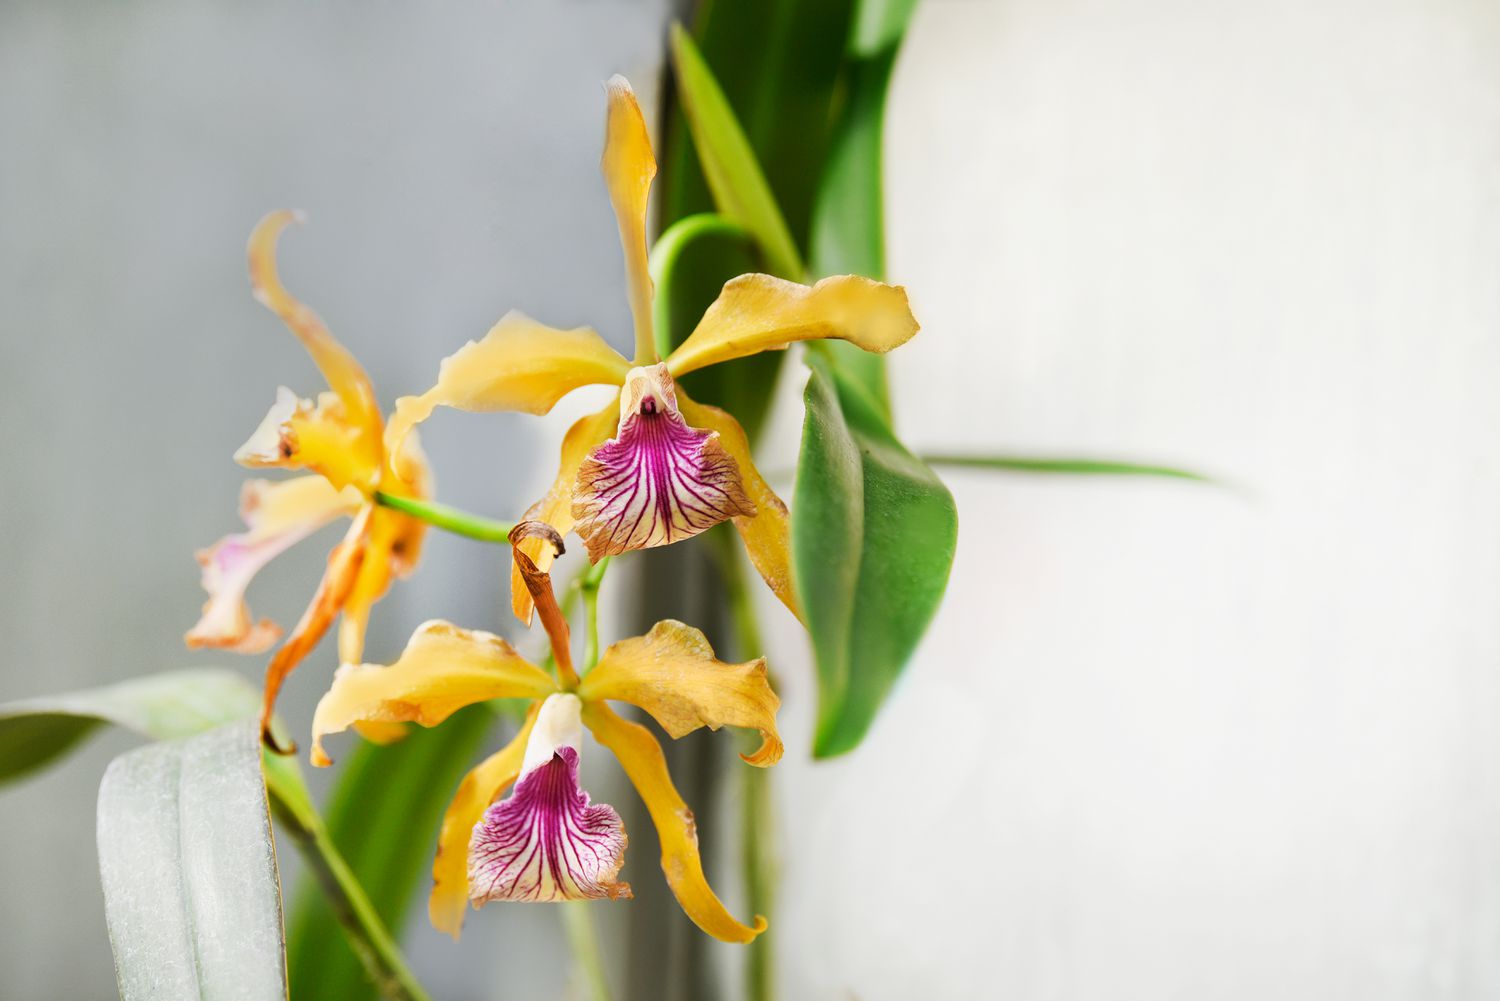 Laelia orchids with yellow and pink and white stried flowers closeup